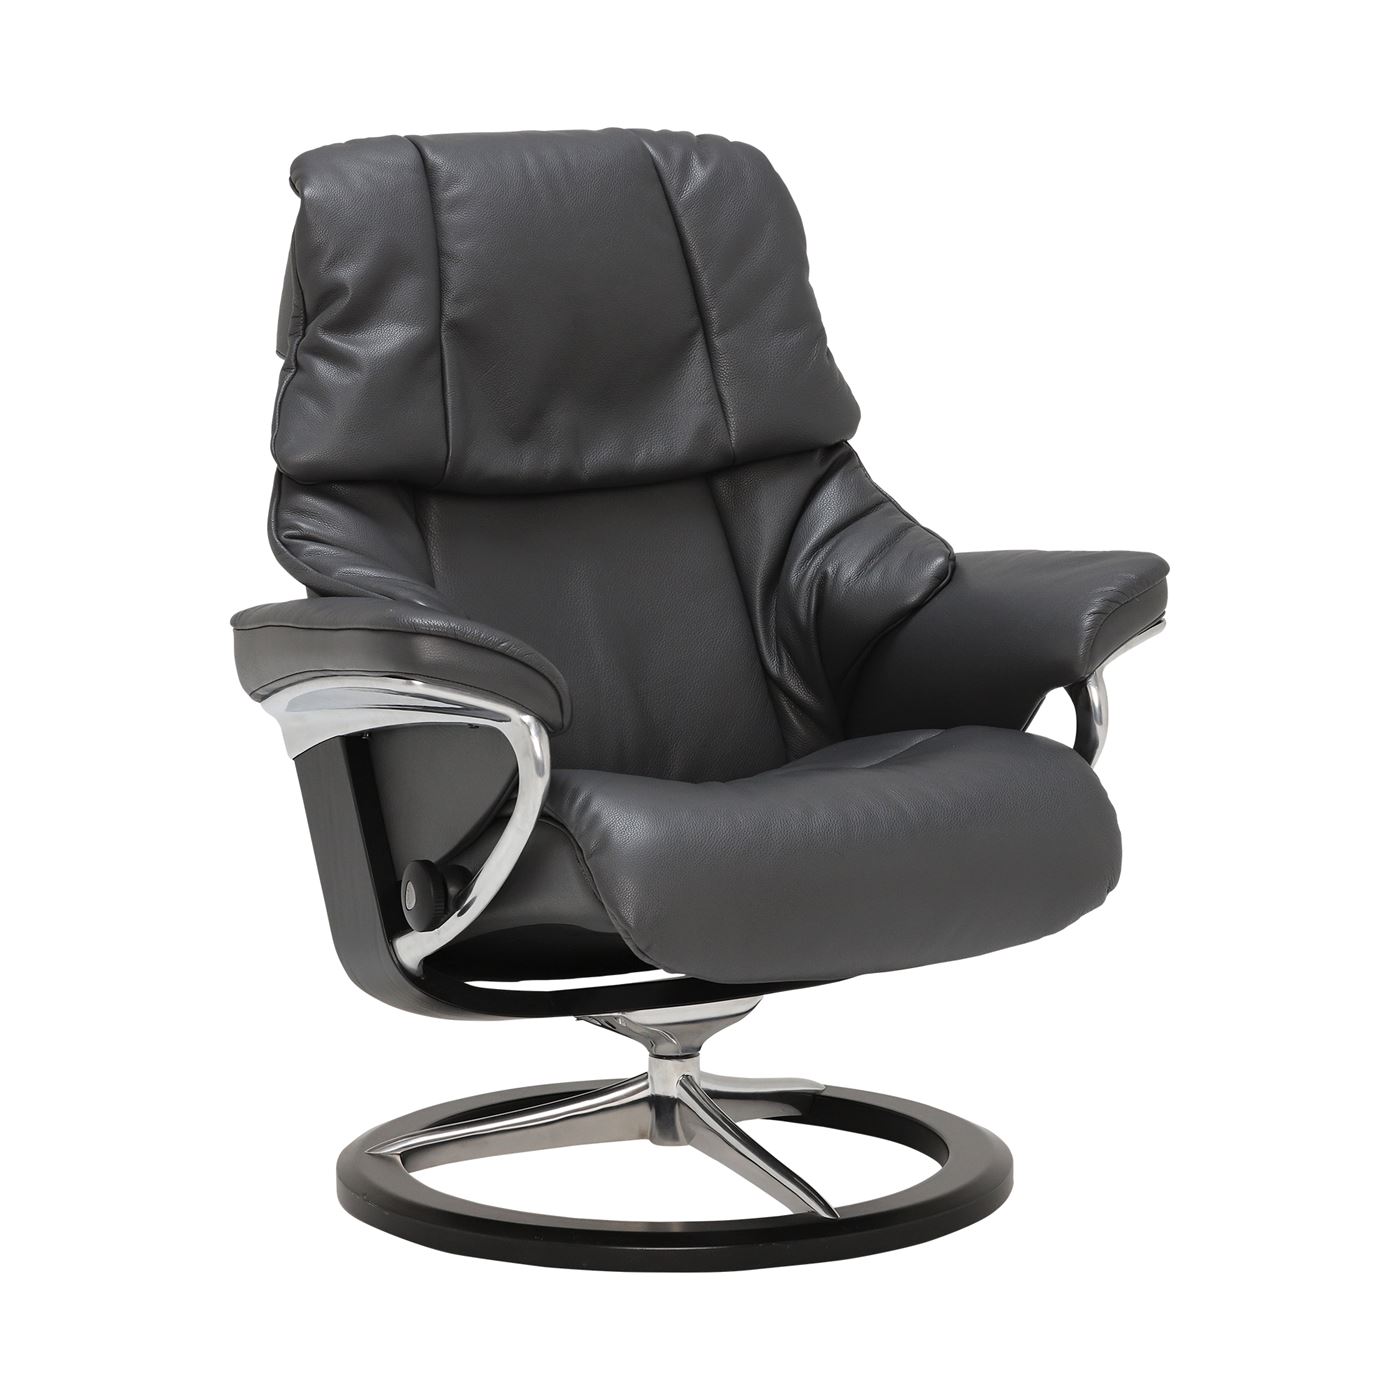 Stressless Reno Small Recliner Chair & Stool With Signature Base, Black Leather | Barker & Stonehouse